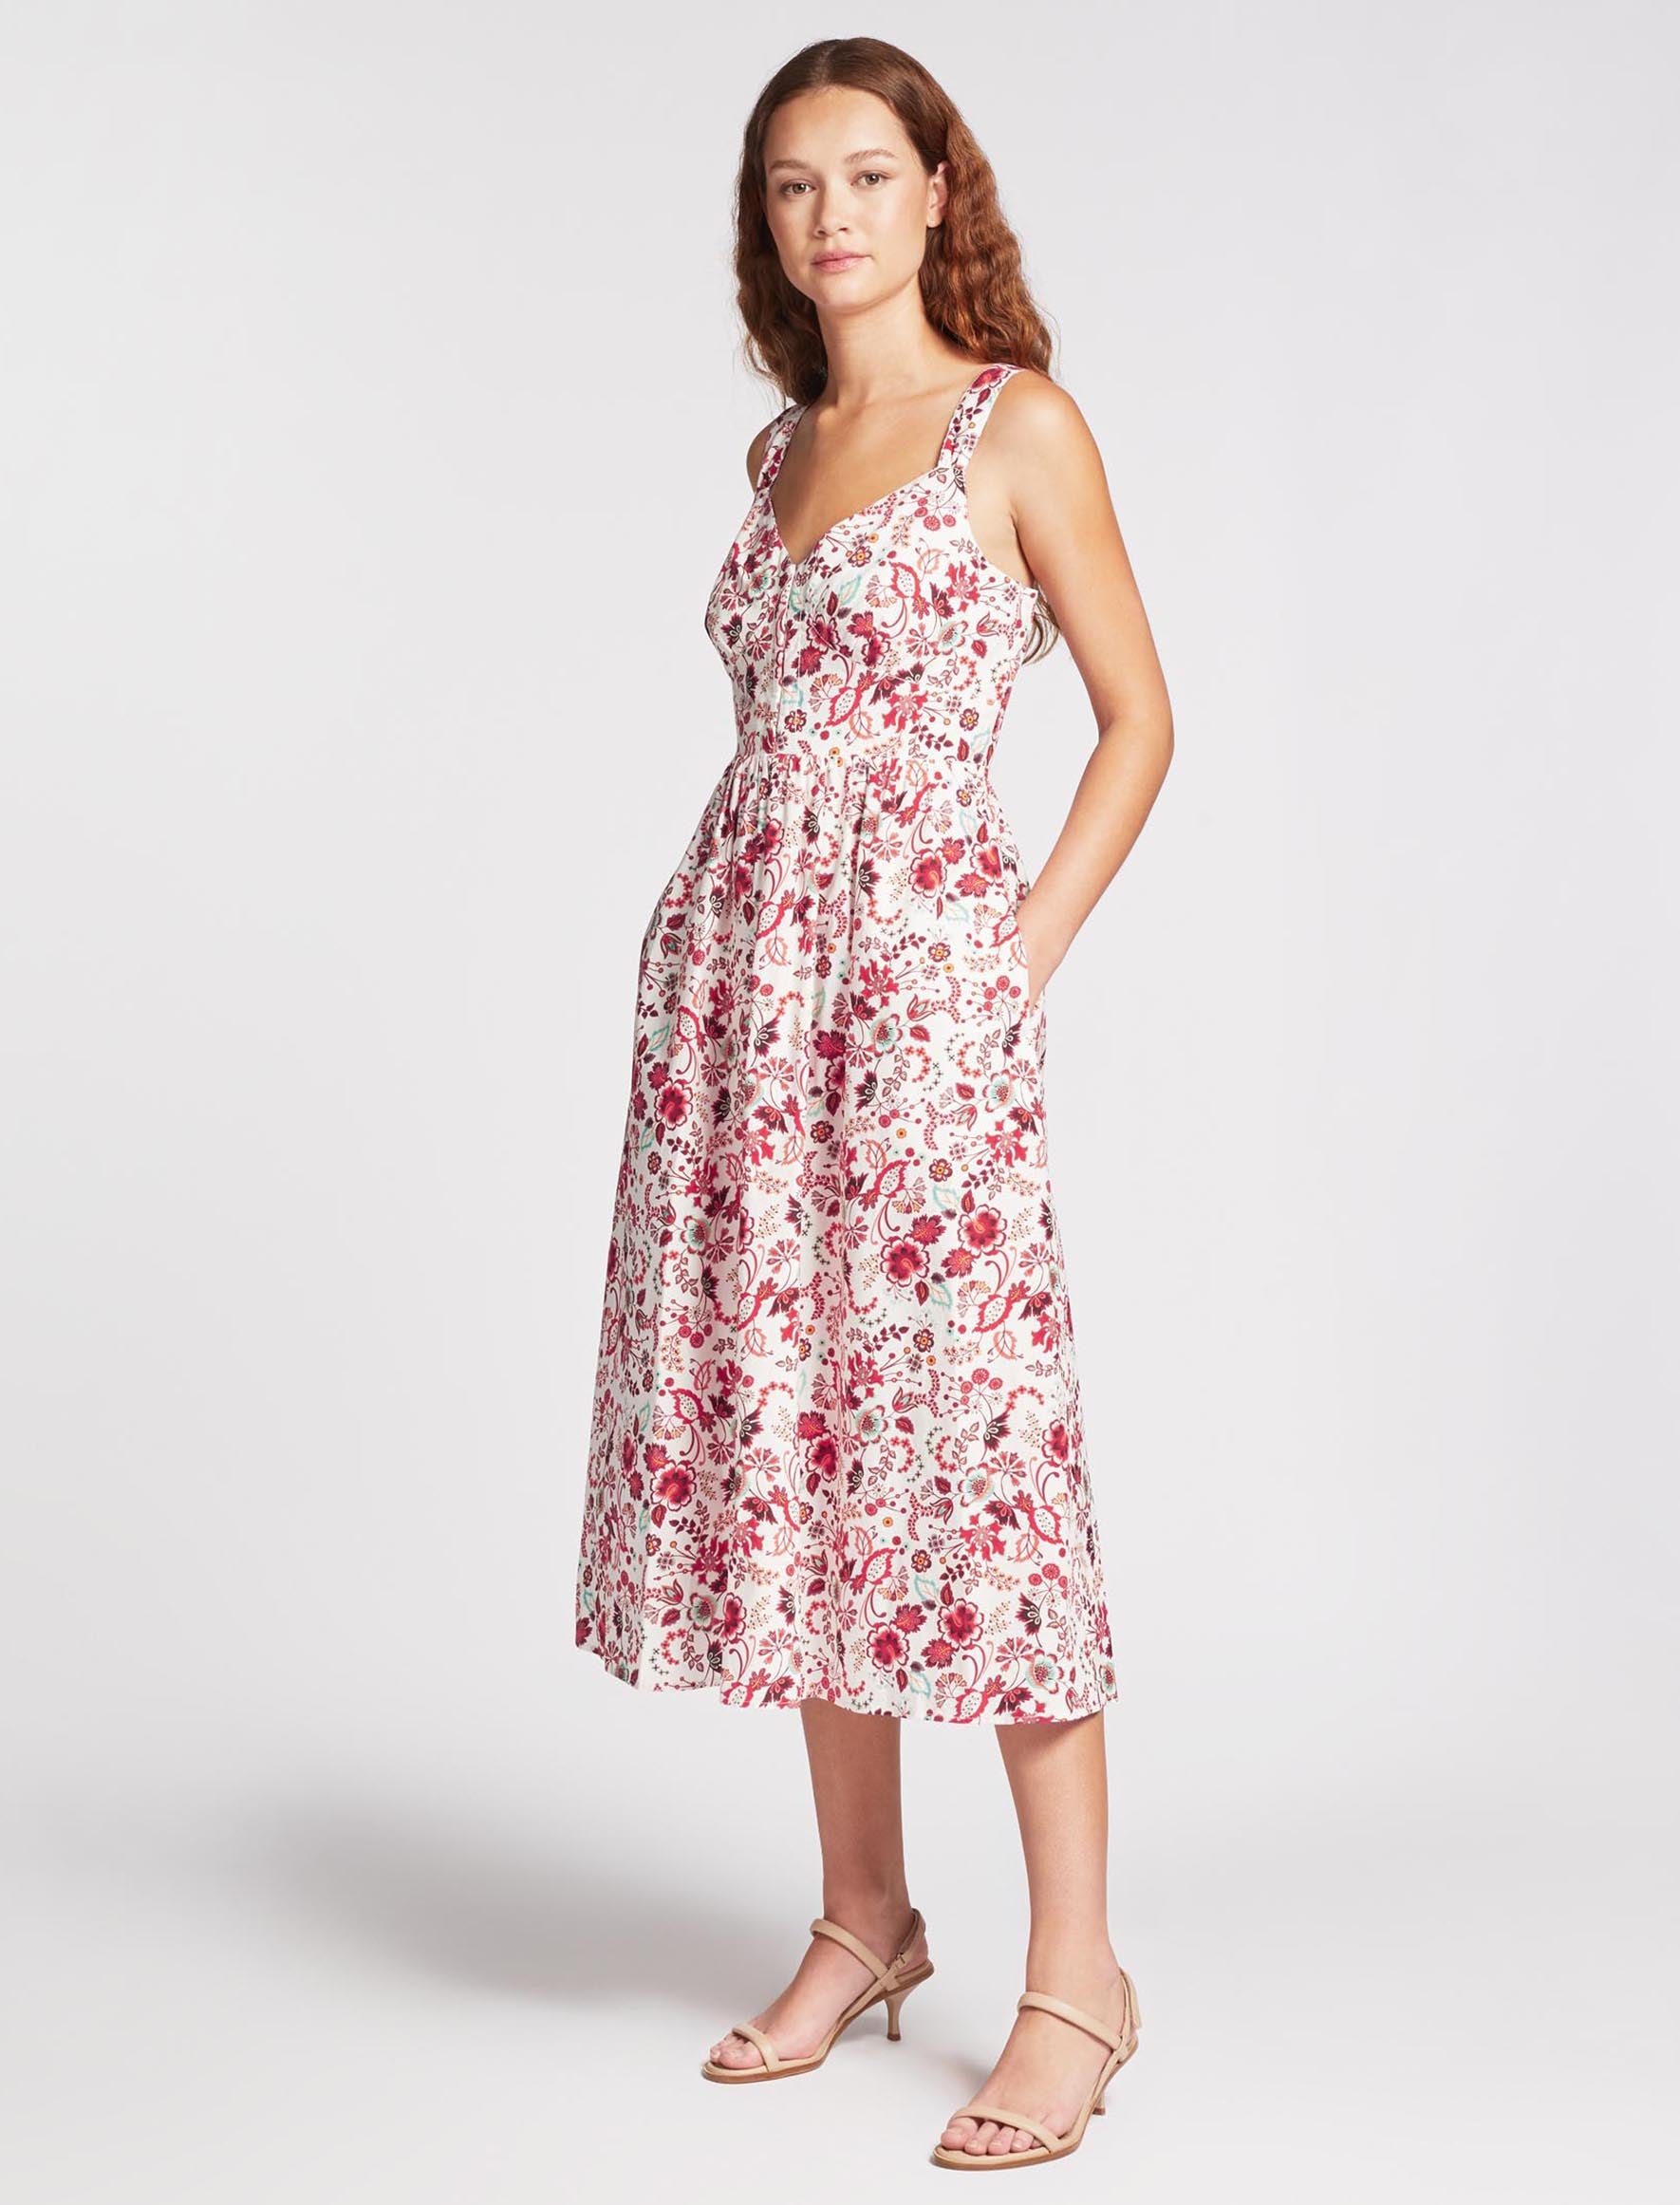 White and Red Floral Fiona Midi Cami Dress